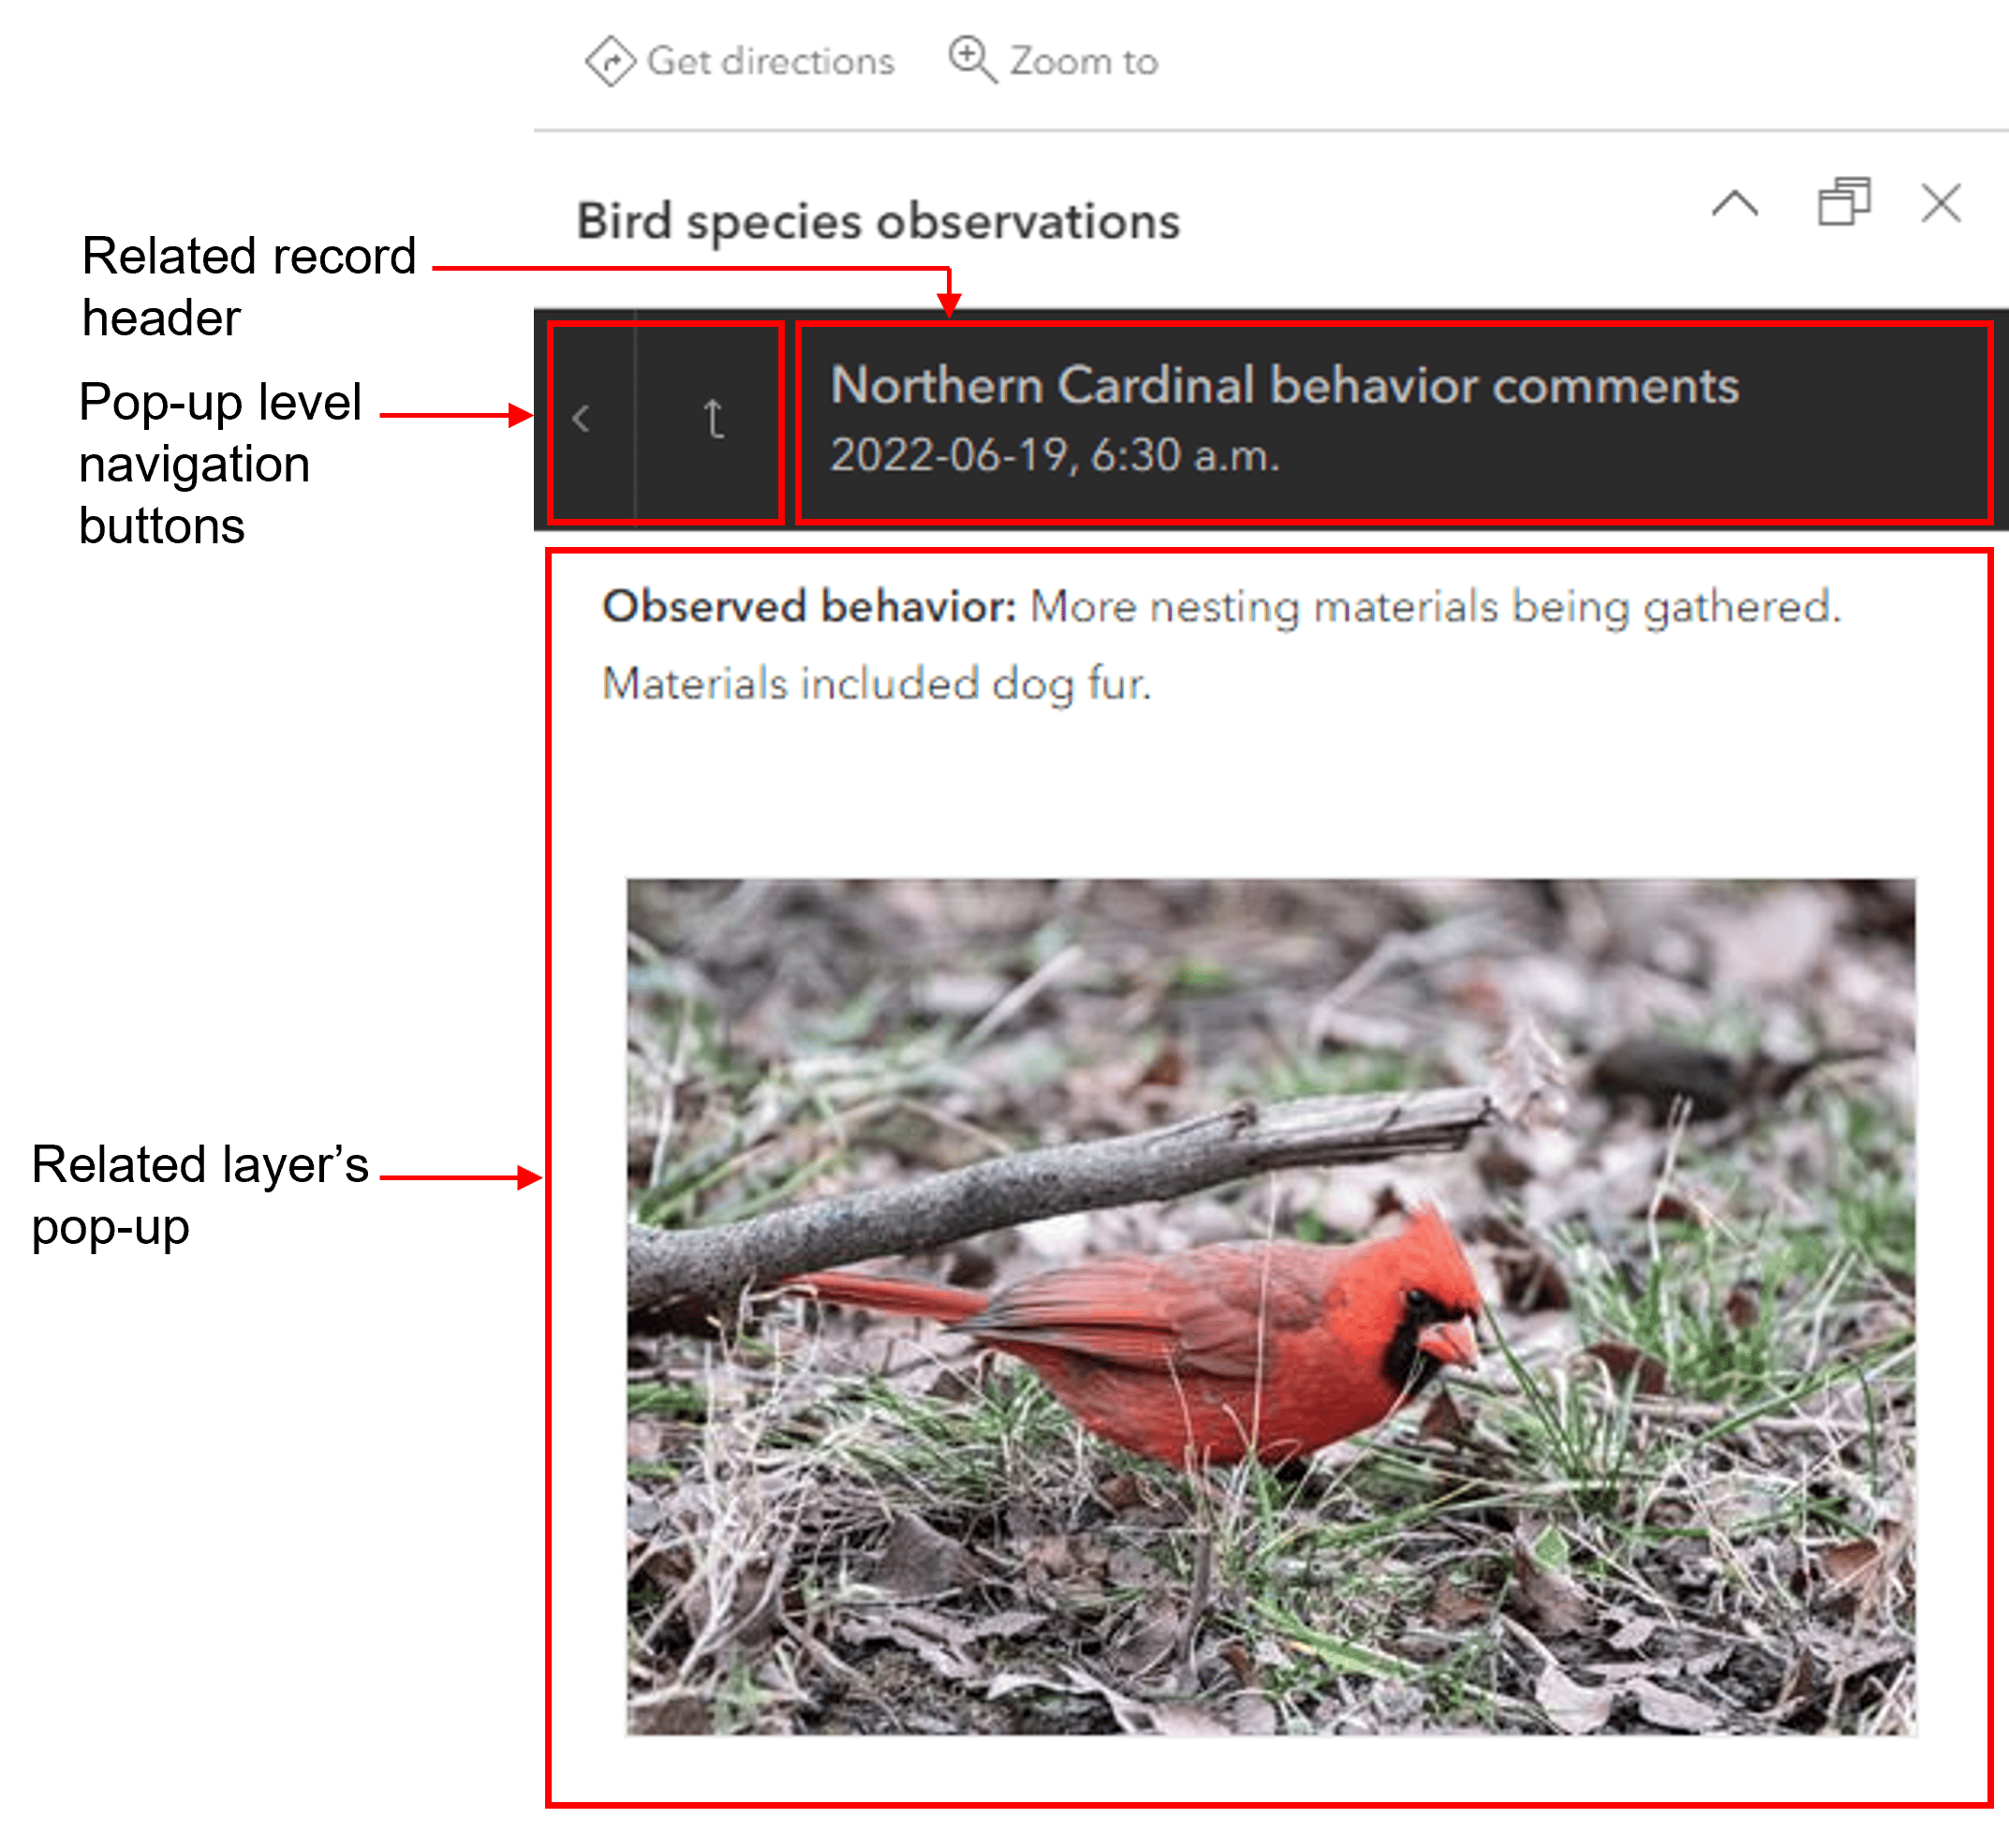 The pop-up from the related bird behavior table.